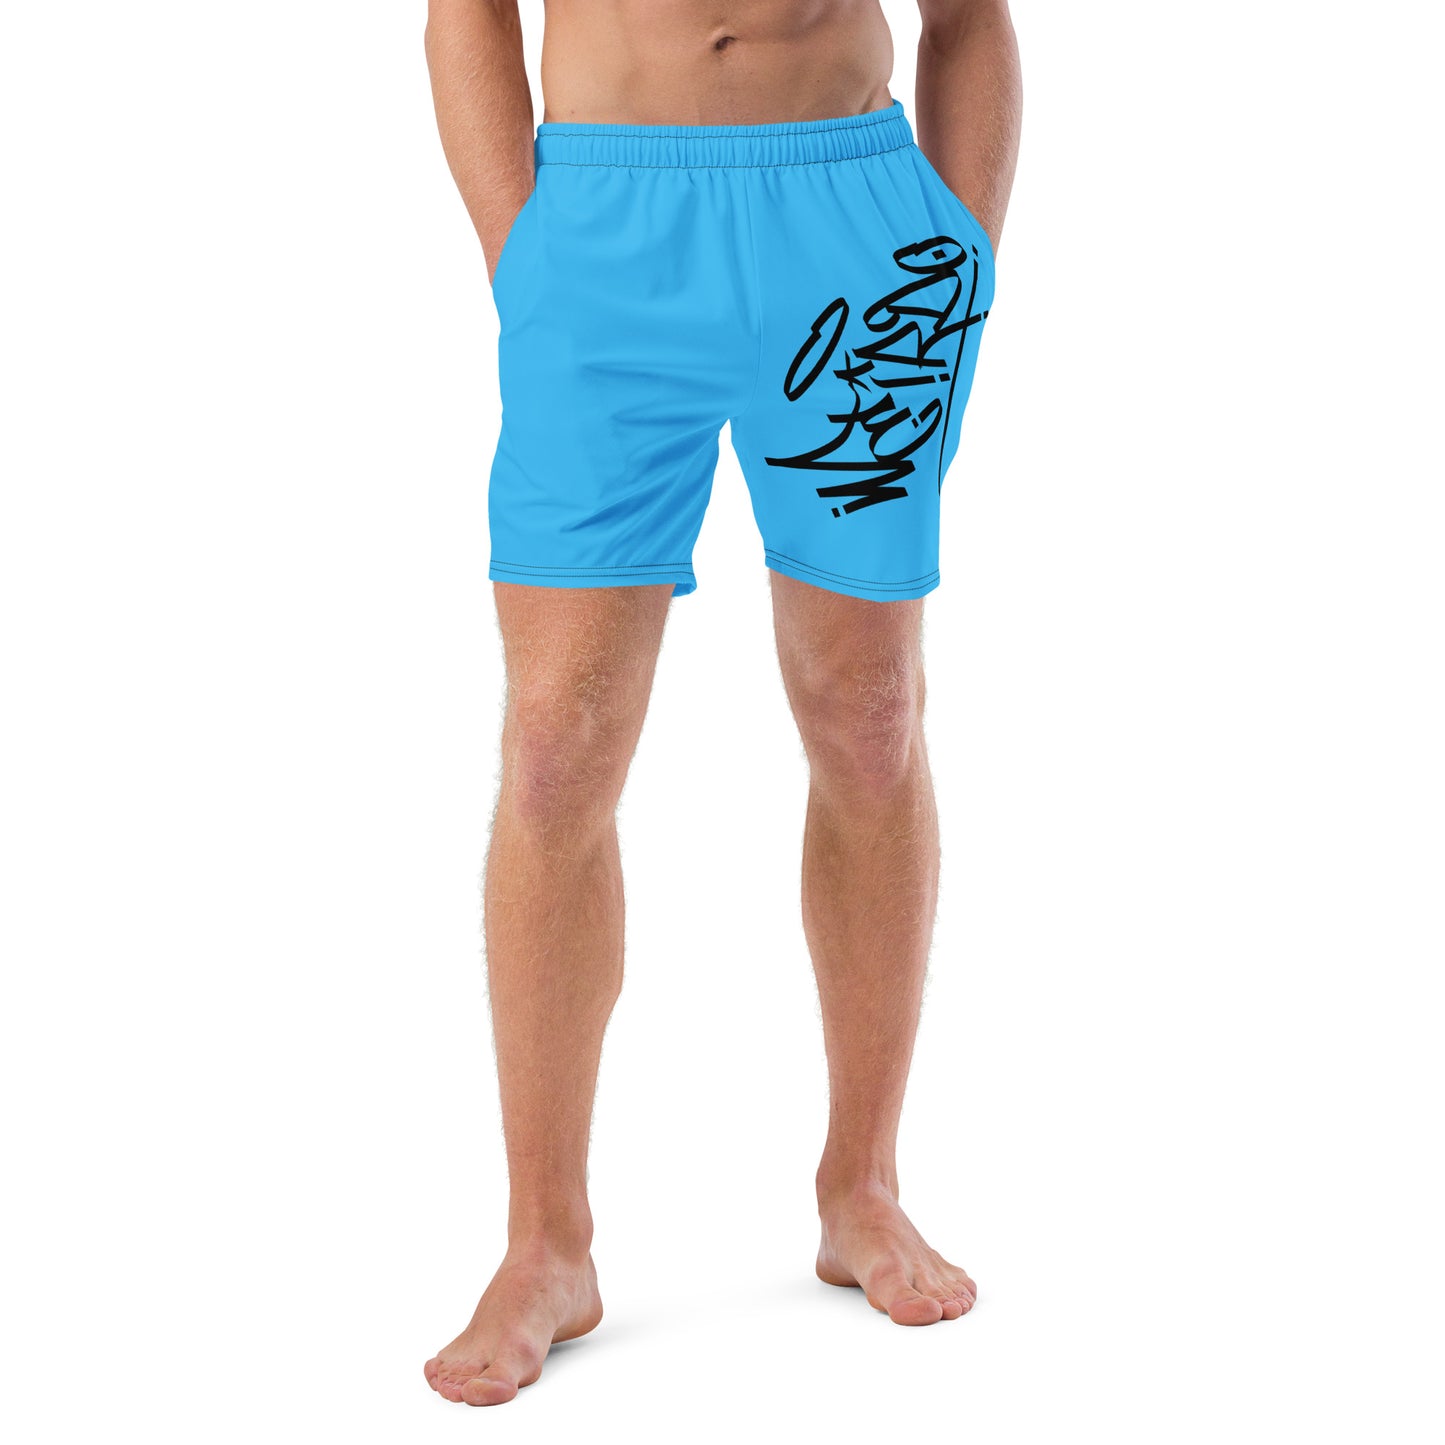 man wearing weirdo tag swim shorts blue by B.Different Clothing independent streetwear inspired by street art graffiti